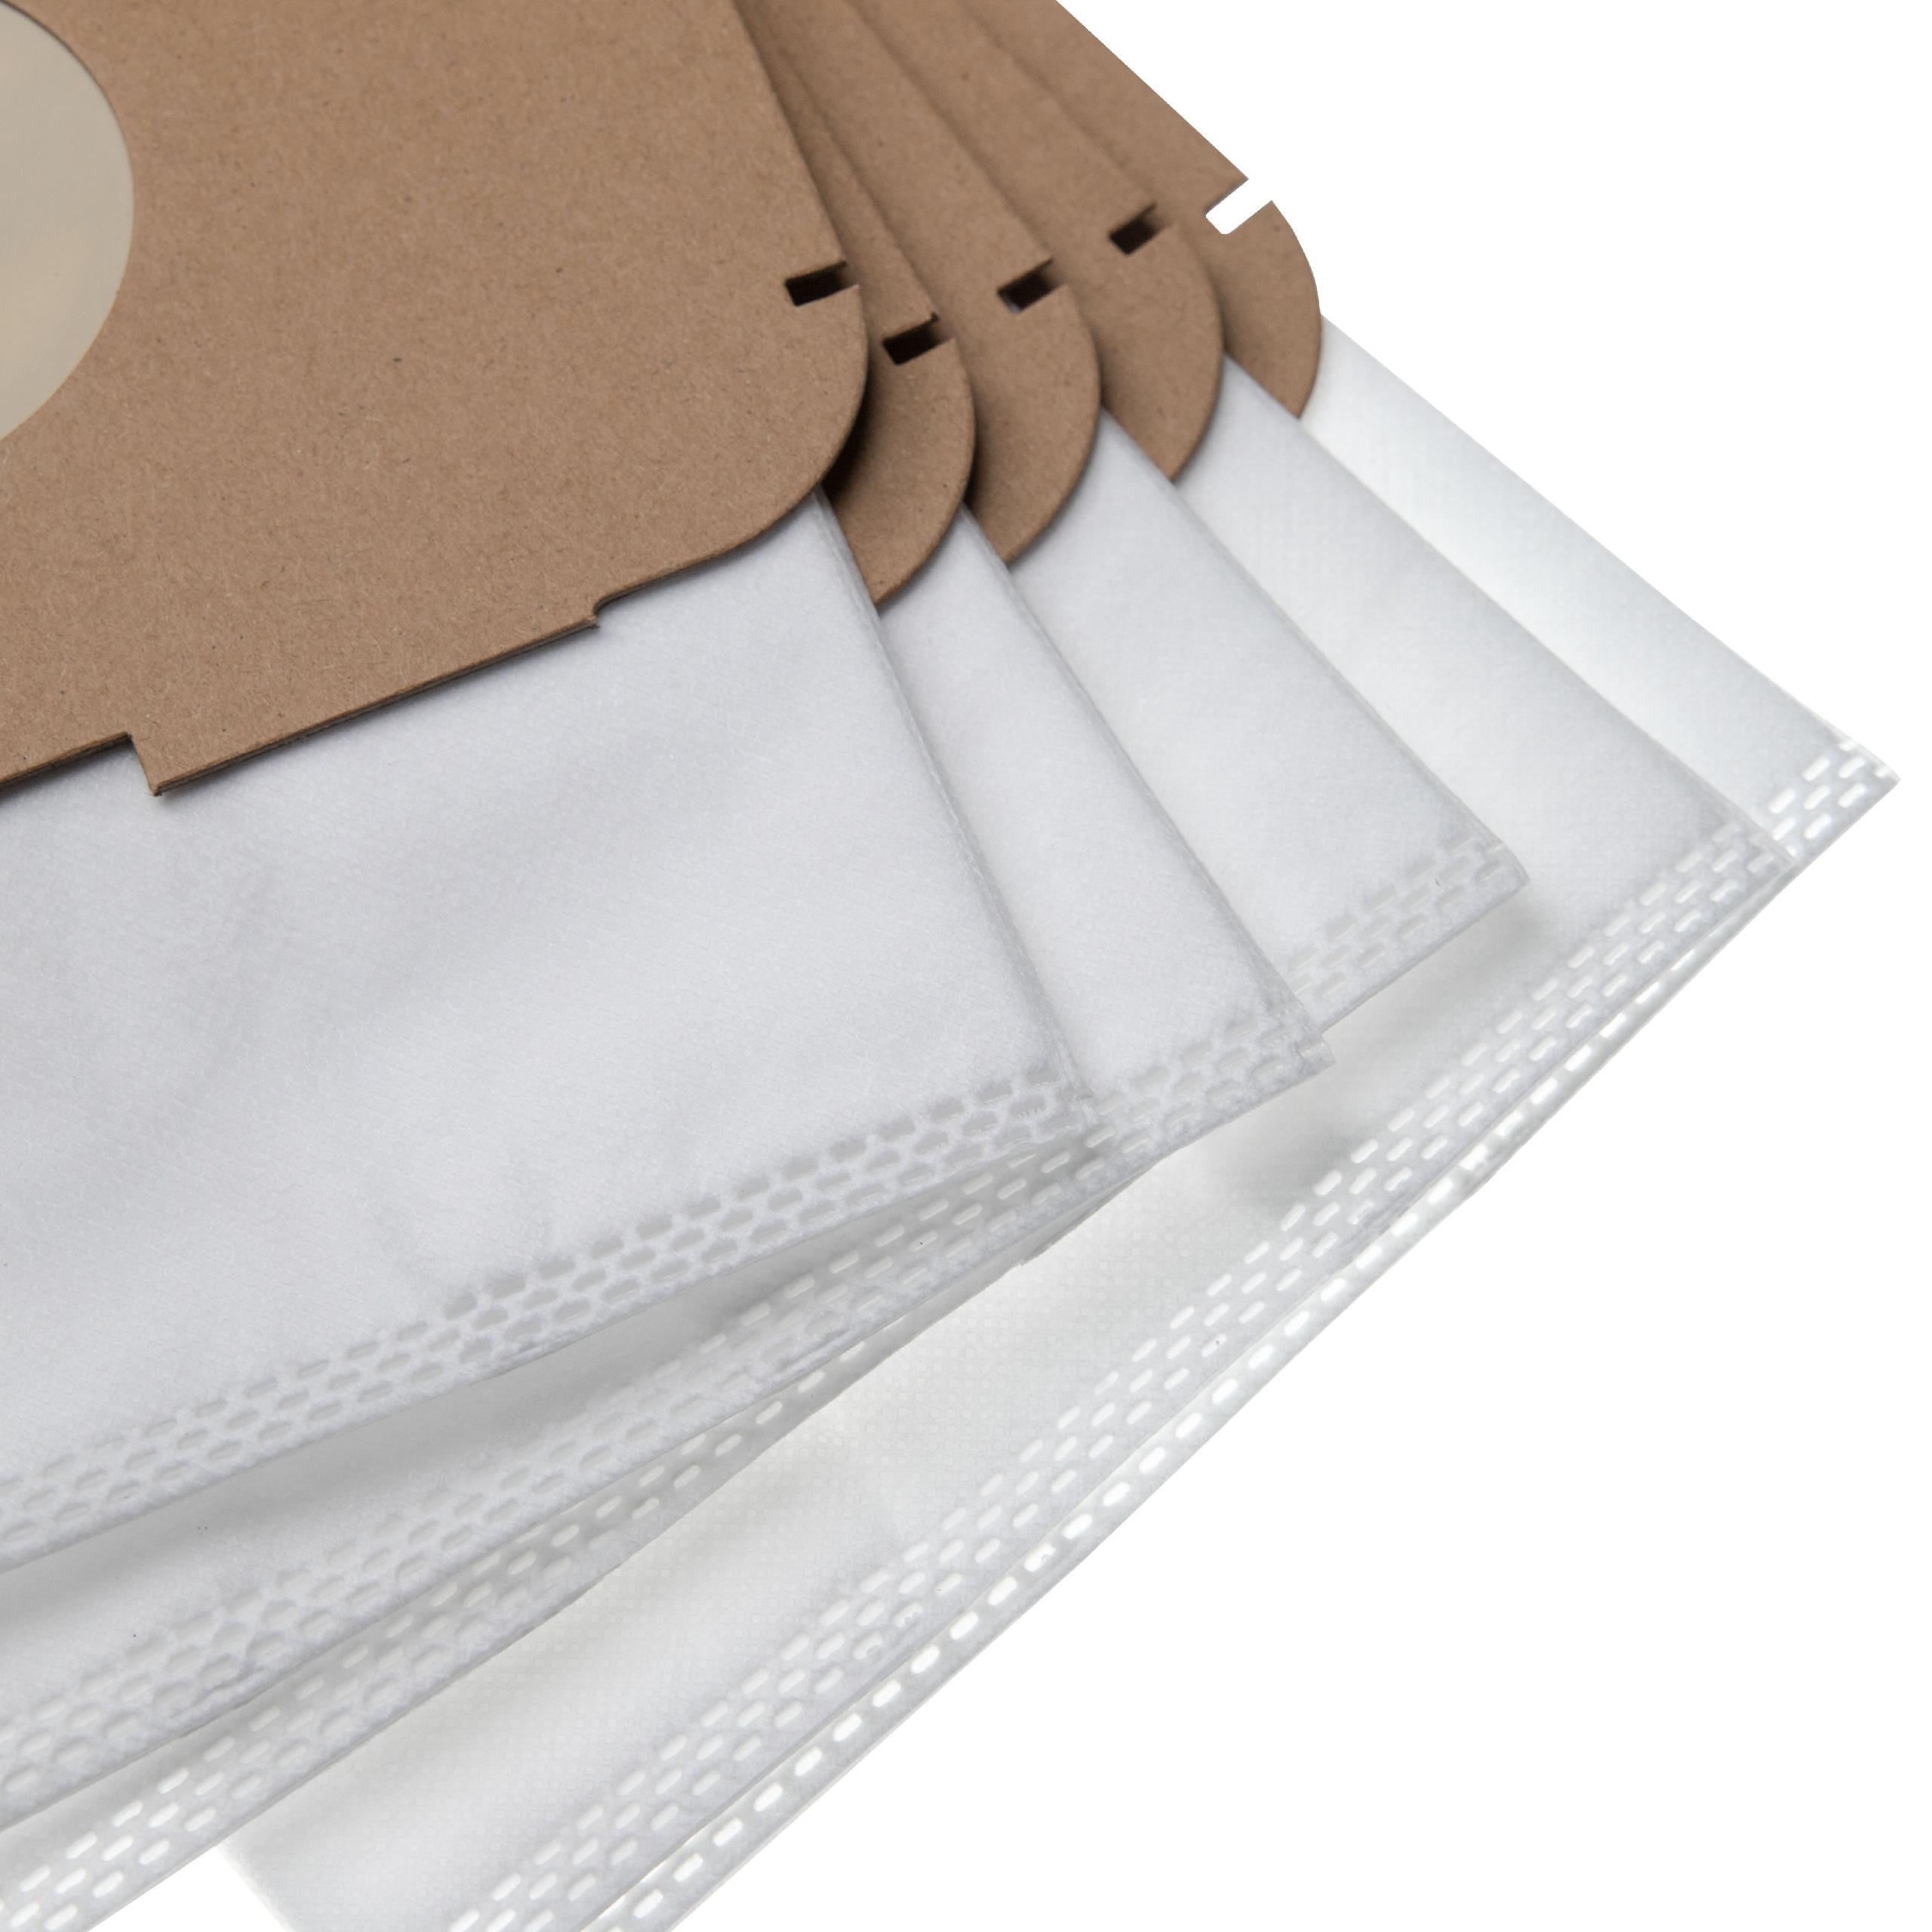 50x Vacuum Cleaner Bag replaces Lux 111000150 for Lux - microfleece